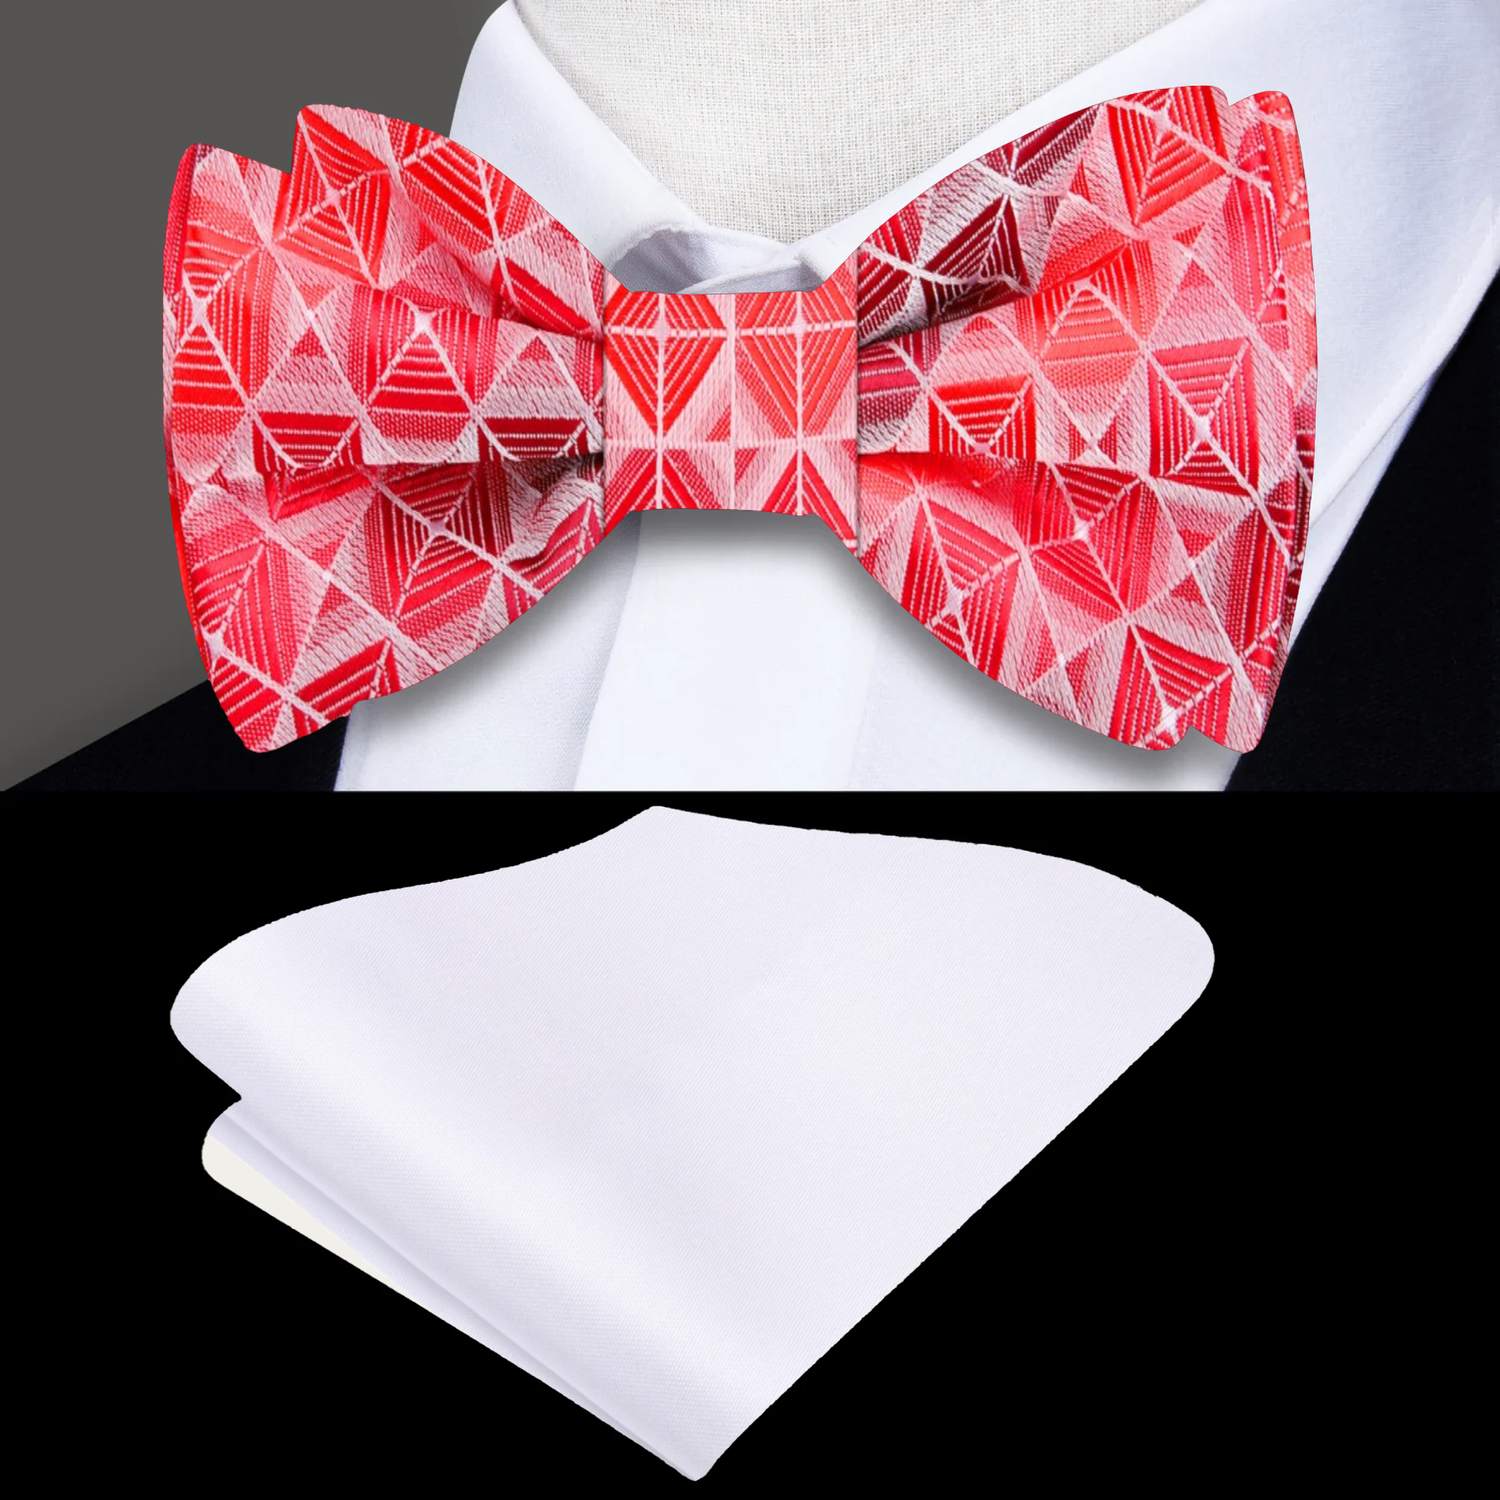 Main: Shades of Red Geometric Bow Tie and White Square on Suit